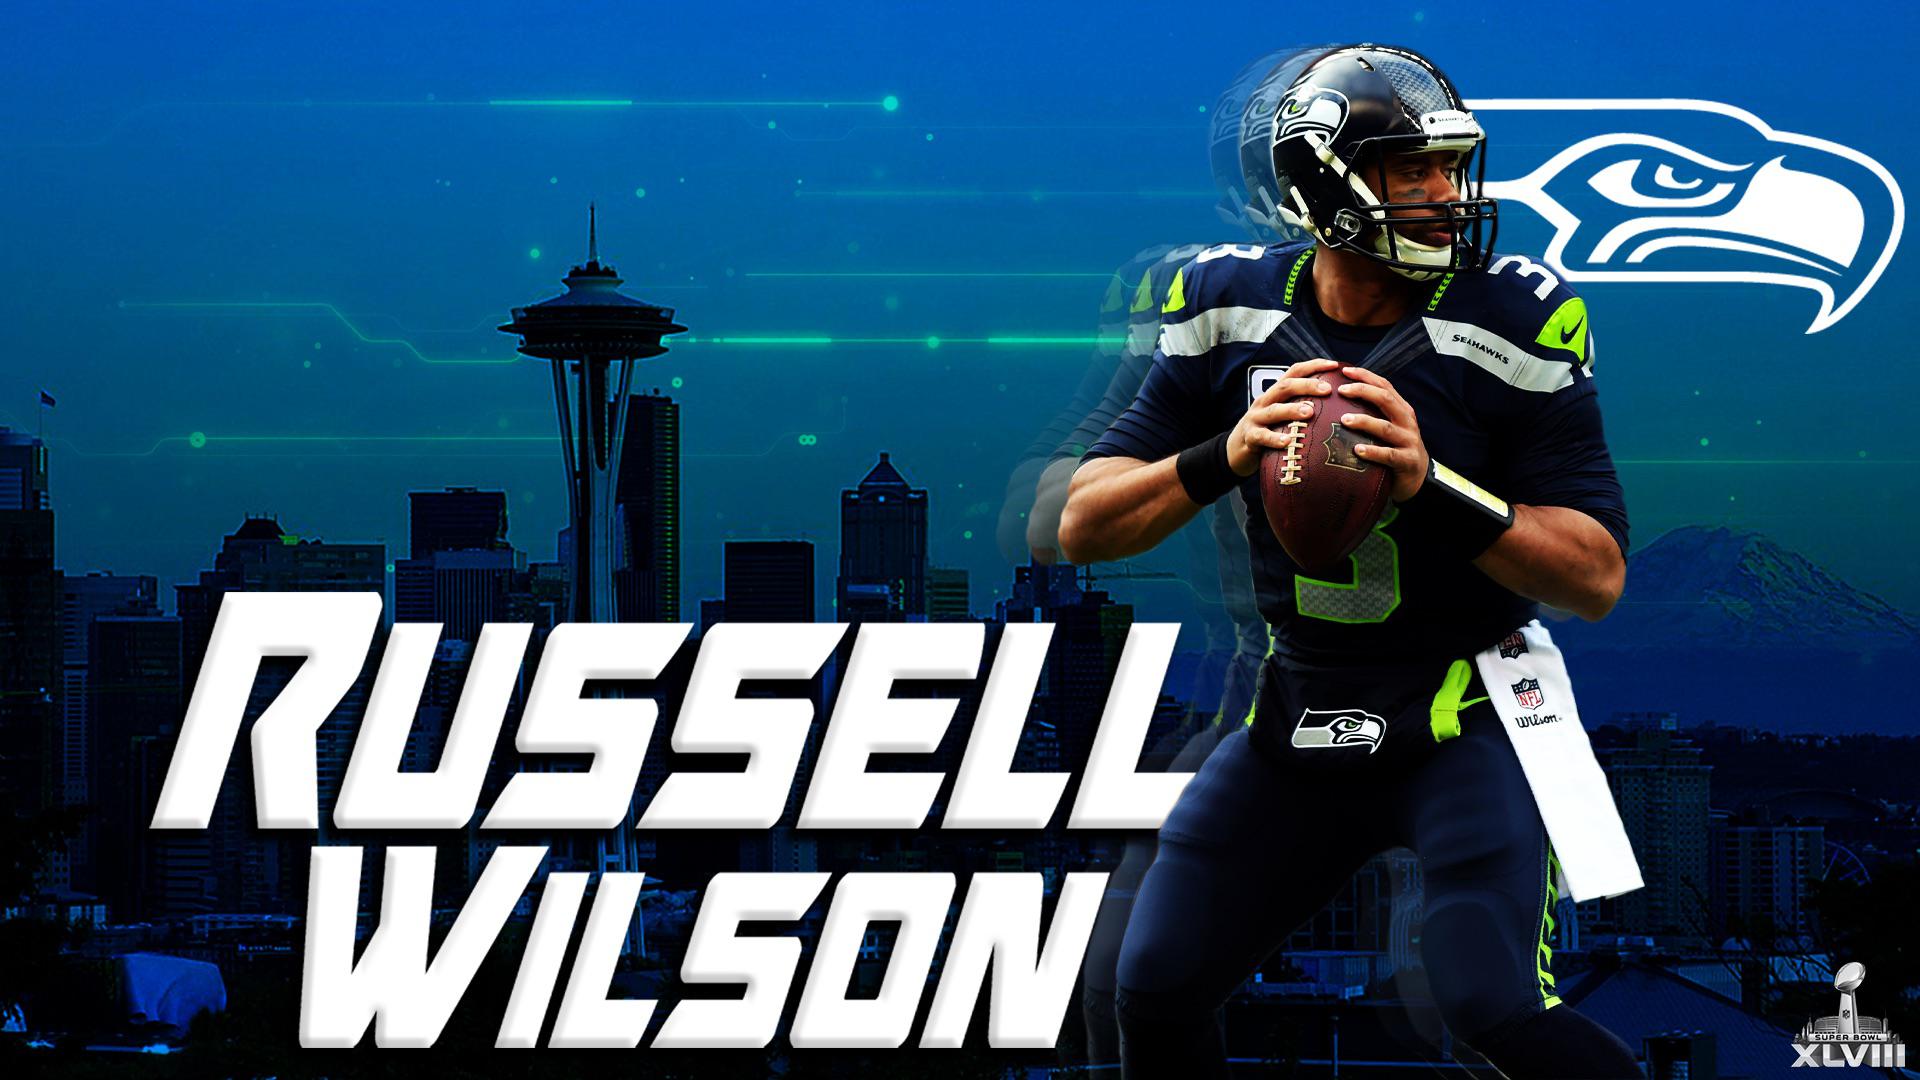 1920x1080 Hello All Im Going Around To All Nfl Teams And Making Player Background Wallpaper 1920x1080 Resolution Hope You Enjoy This Russell Wilson Background I Made If You Would Like To See Other Players